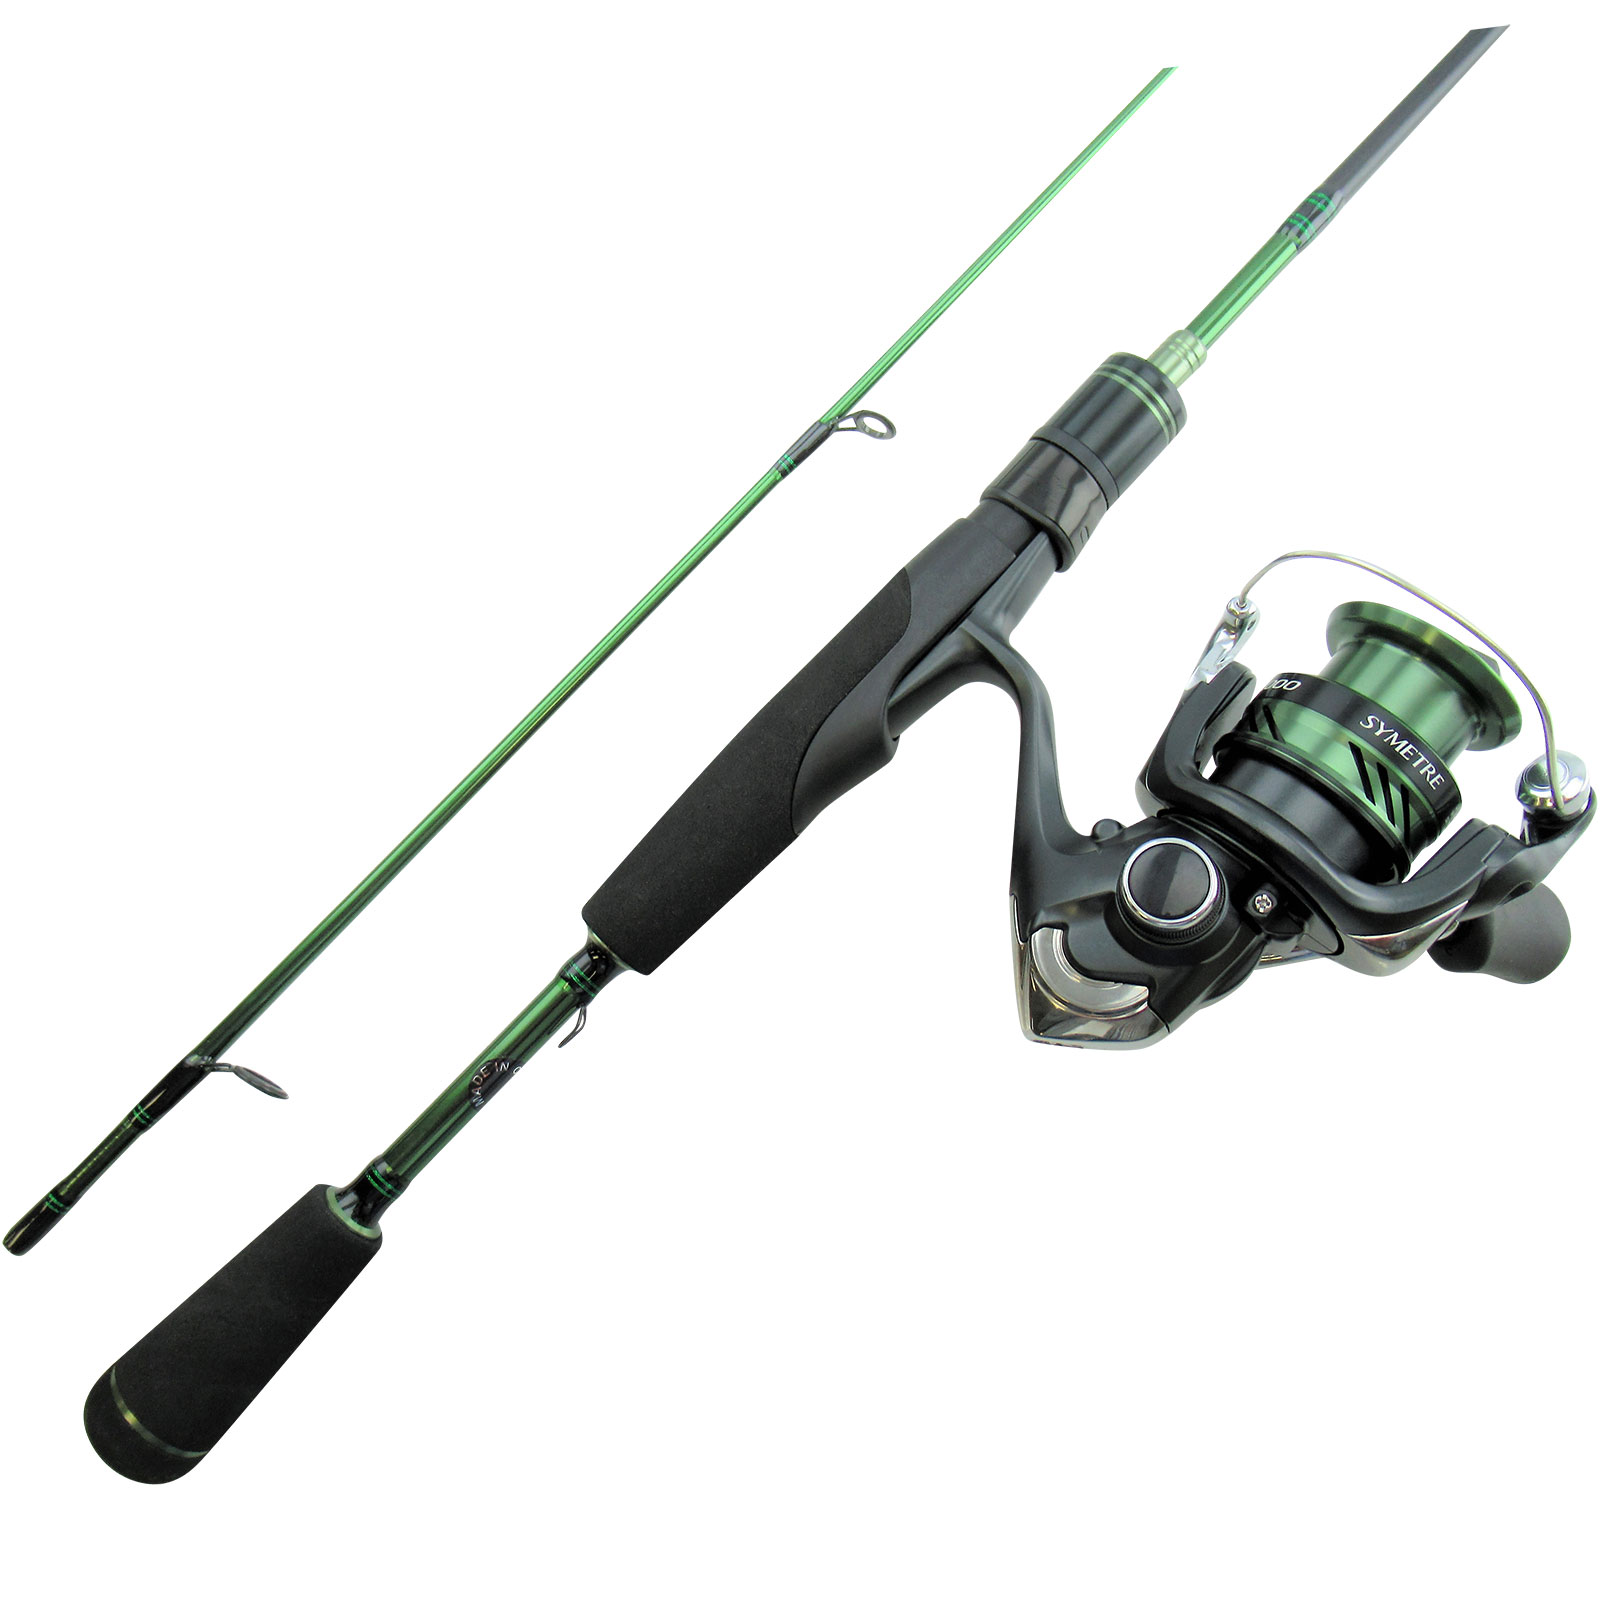 Symetre Fishing Pole Discounted Buy